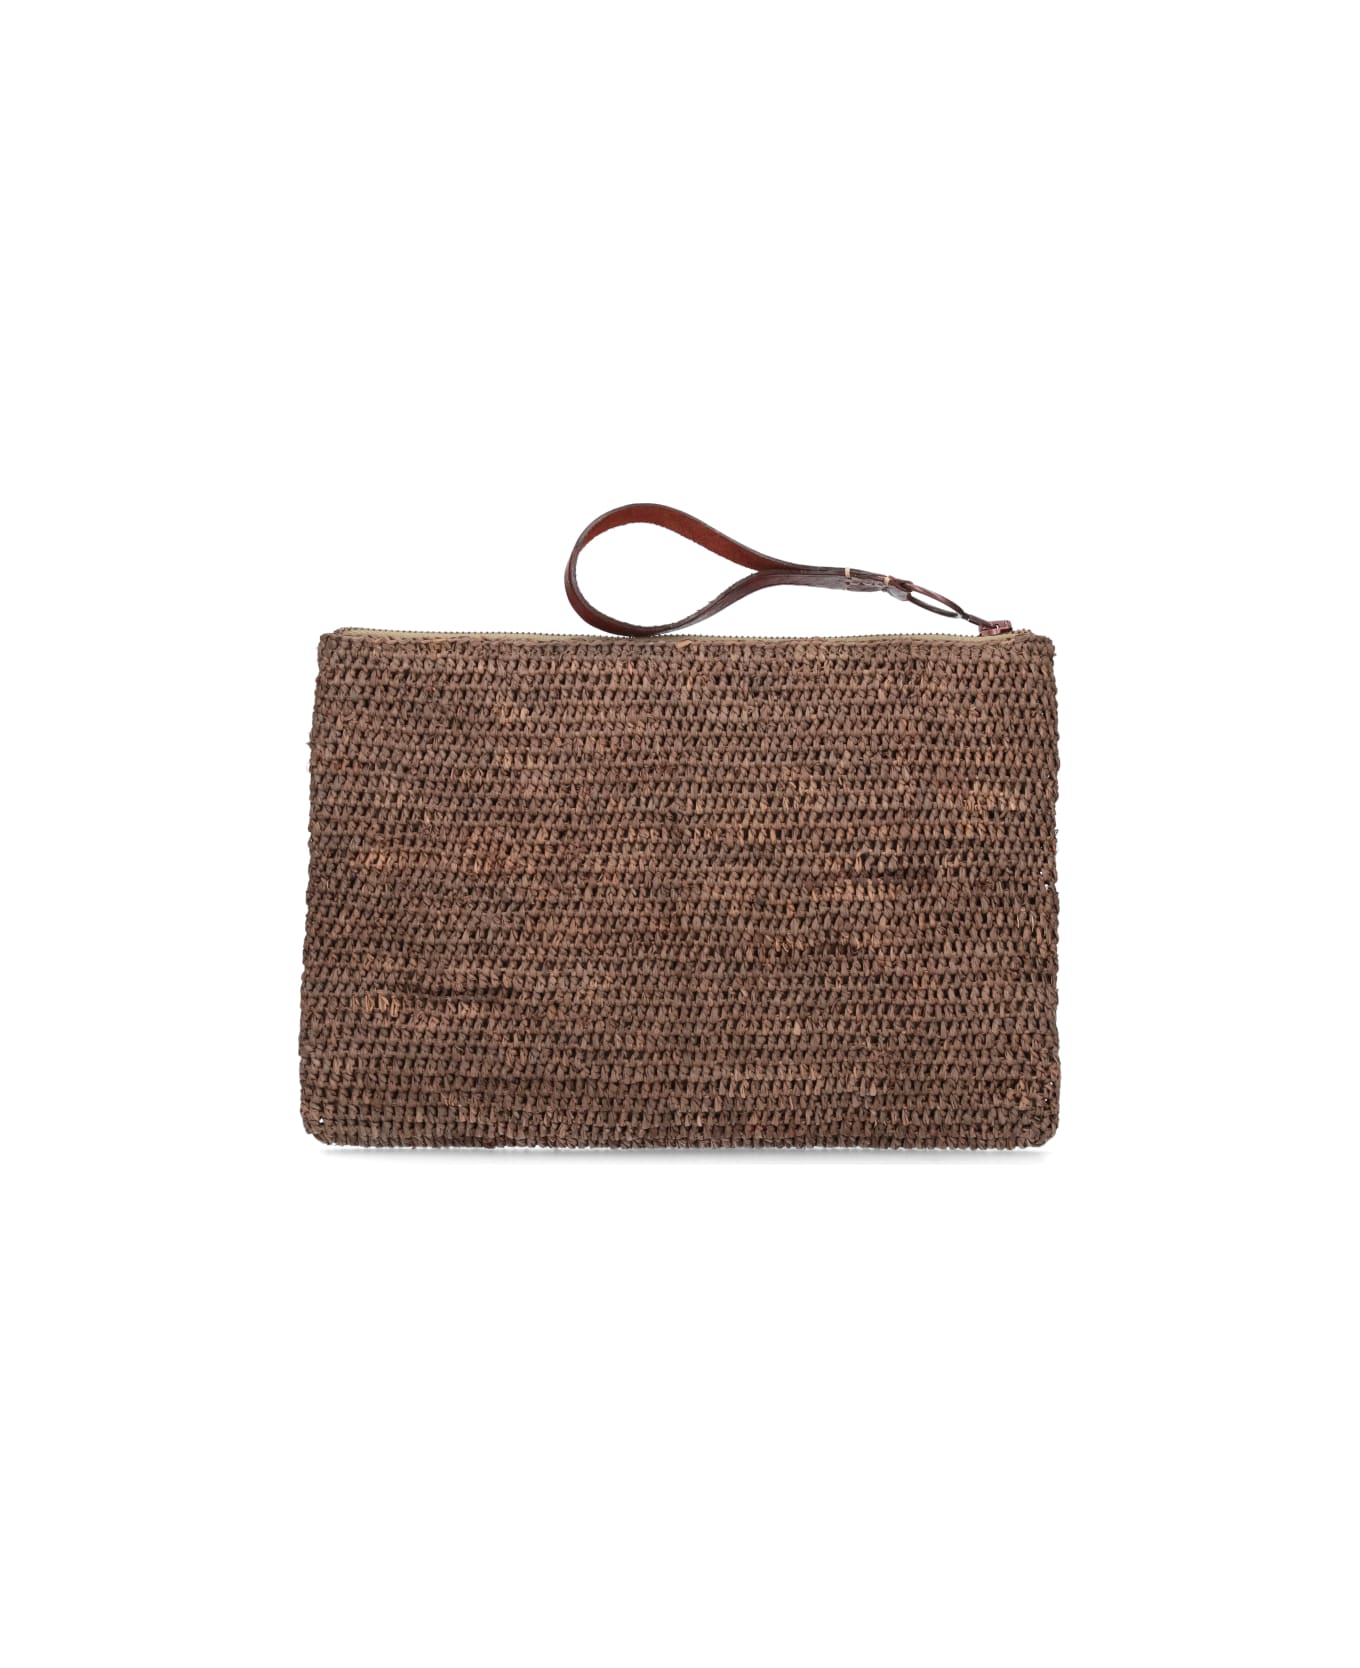 Ibeliv Pouch "ampy" - Brown